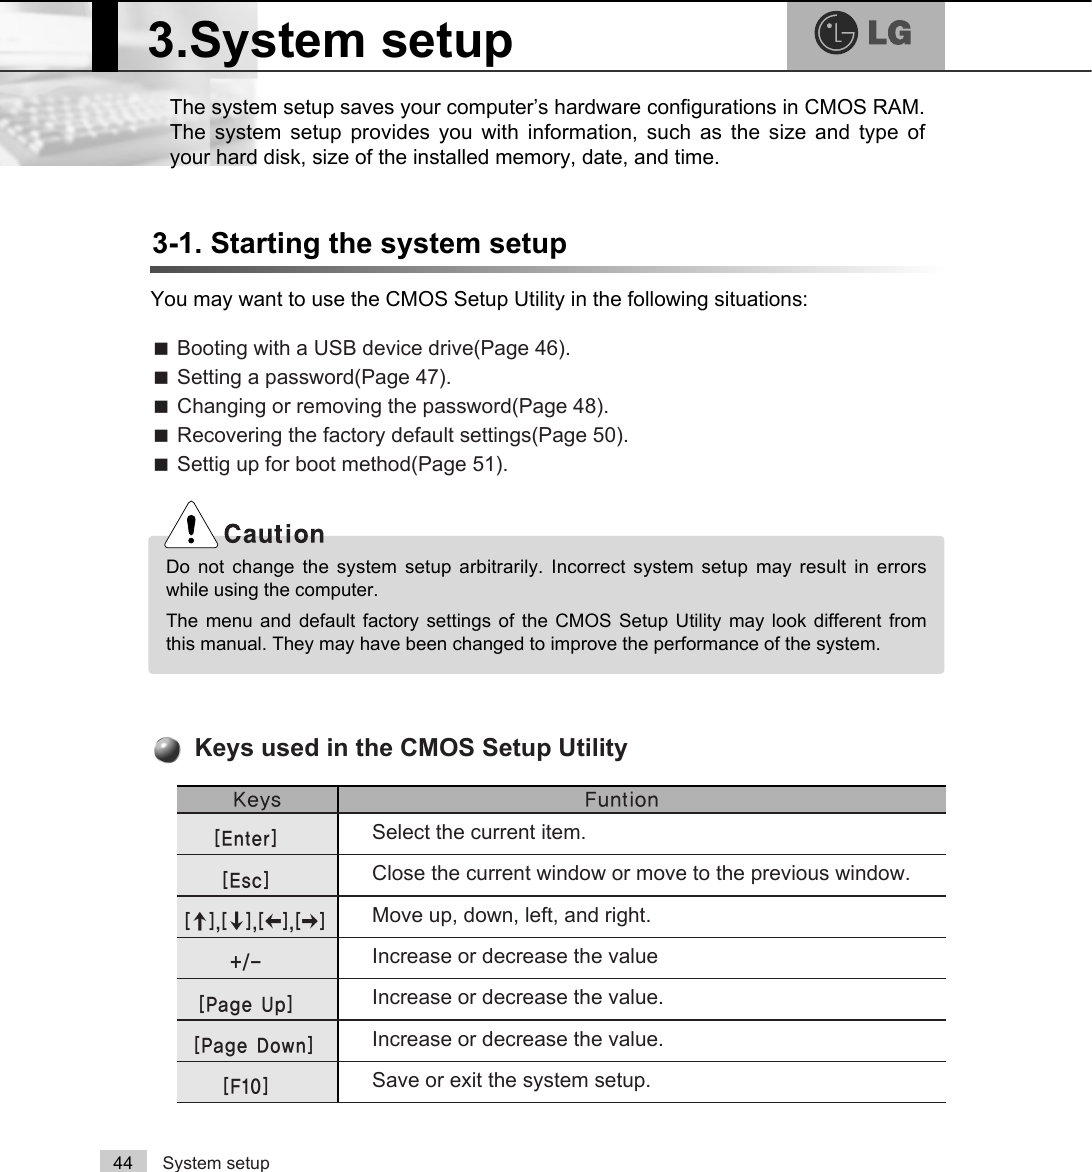 System setup44The system setup saves your computer’s hardware configurations in CMOS RAM.The system setup provides you with information, such as the size and type ofyour hard disk, size of the installed memory, date, and time.3-1. Starting the system setupYou may want to use the CMOS Setup Utility in the following situations:ãBooting with a USB device drive(Page 46).ãSetting a password(Page 47).ãChanging or removing the password(Page 48).ãRecovering the factory default settings(Page 50).ãSettig up for boot method(Page 51)..H\V )XQWLRQSelect the current item.&gt;(QWHU@Close the current window or move to the previous window.&gt;(VF@Move up, down, left, and right.&gt;Ⓑ@&gt;Ⓒ@&gt;⒵@&gt;Ⓐ@Increase or decrease the valueIncrease or decrease the value.Increase or decrease the value.Save or exit the system setup.&gt;3DJH8S@&gt;3DJH&apos;RZQ@&gt;)@Keys used in the CMOS Setup Utility3.System setupDo not change the system setup arbitrarily. Incorrect system setup may result in errorswhile using the computer.The menu and default factory settings of the CMOS Setup Utility may look different fromthis manual. They may have been changed to improve the performance of the system.